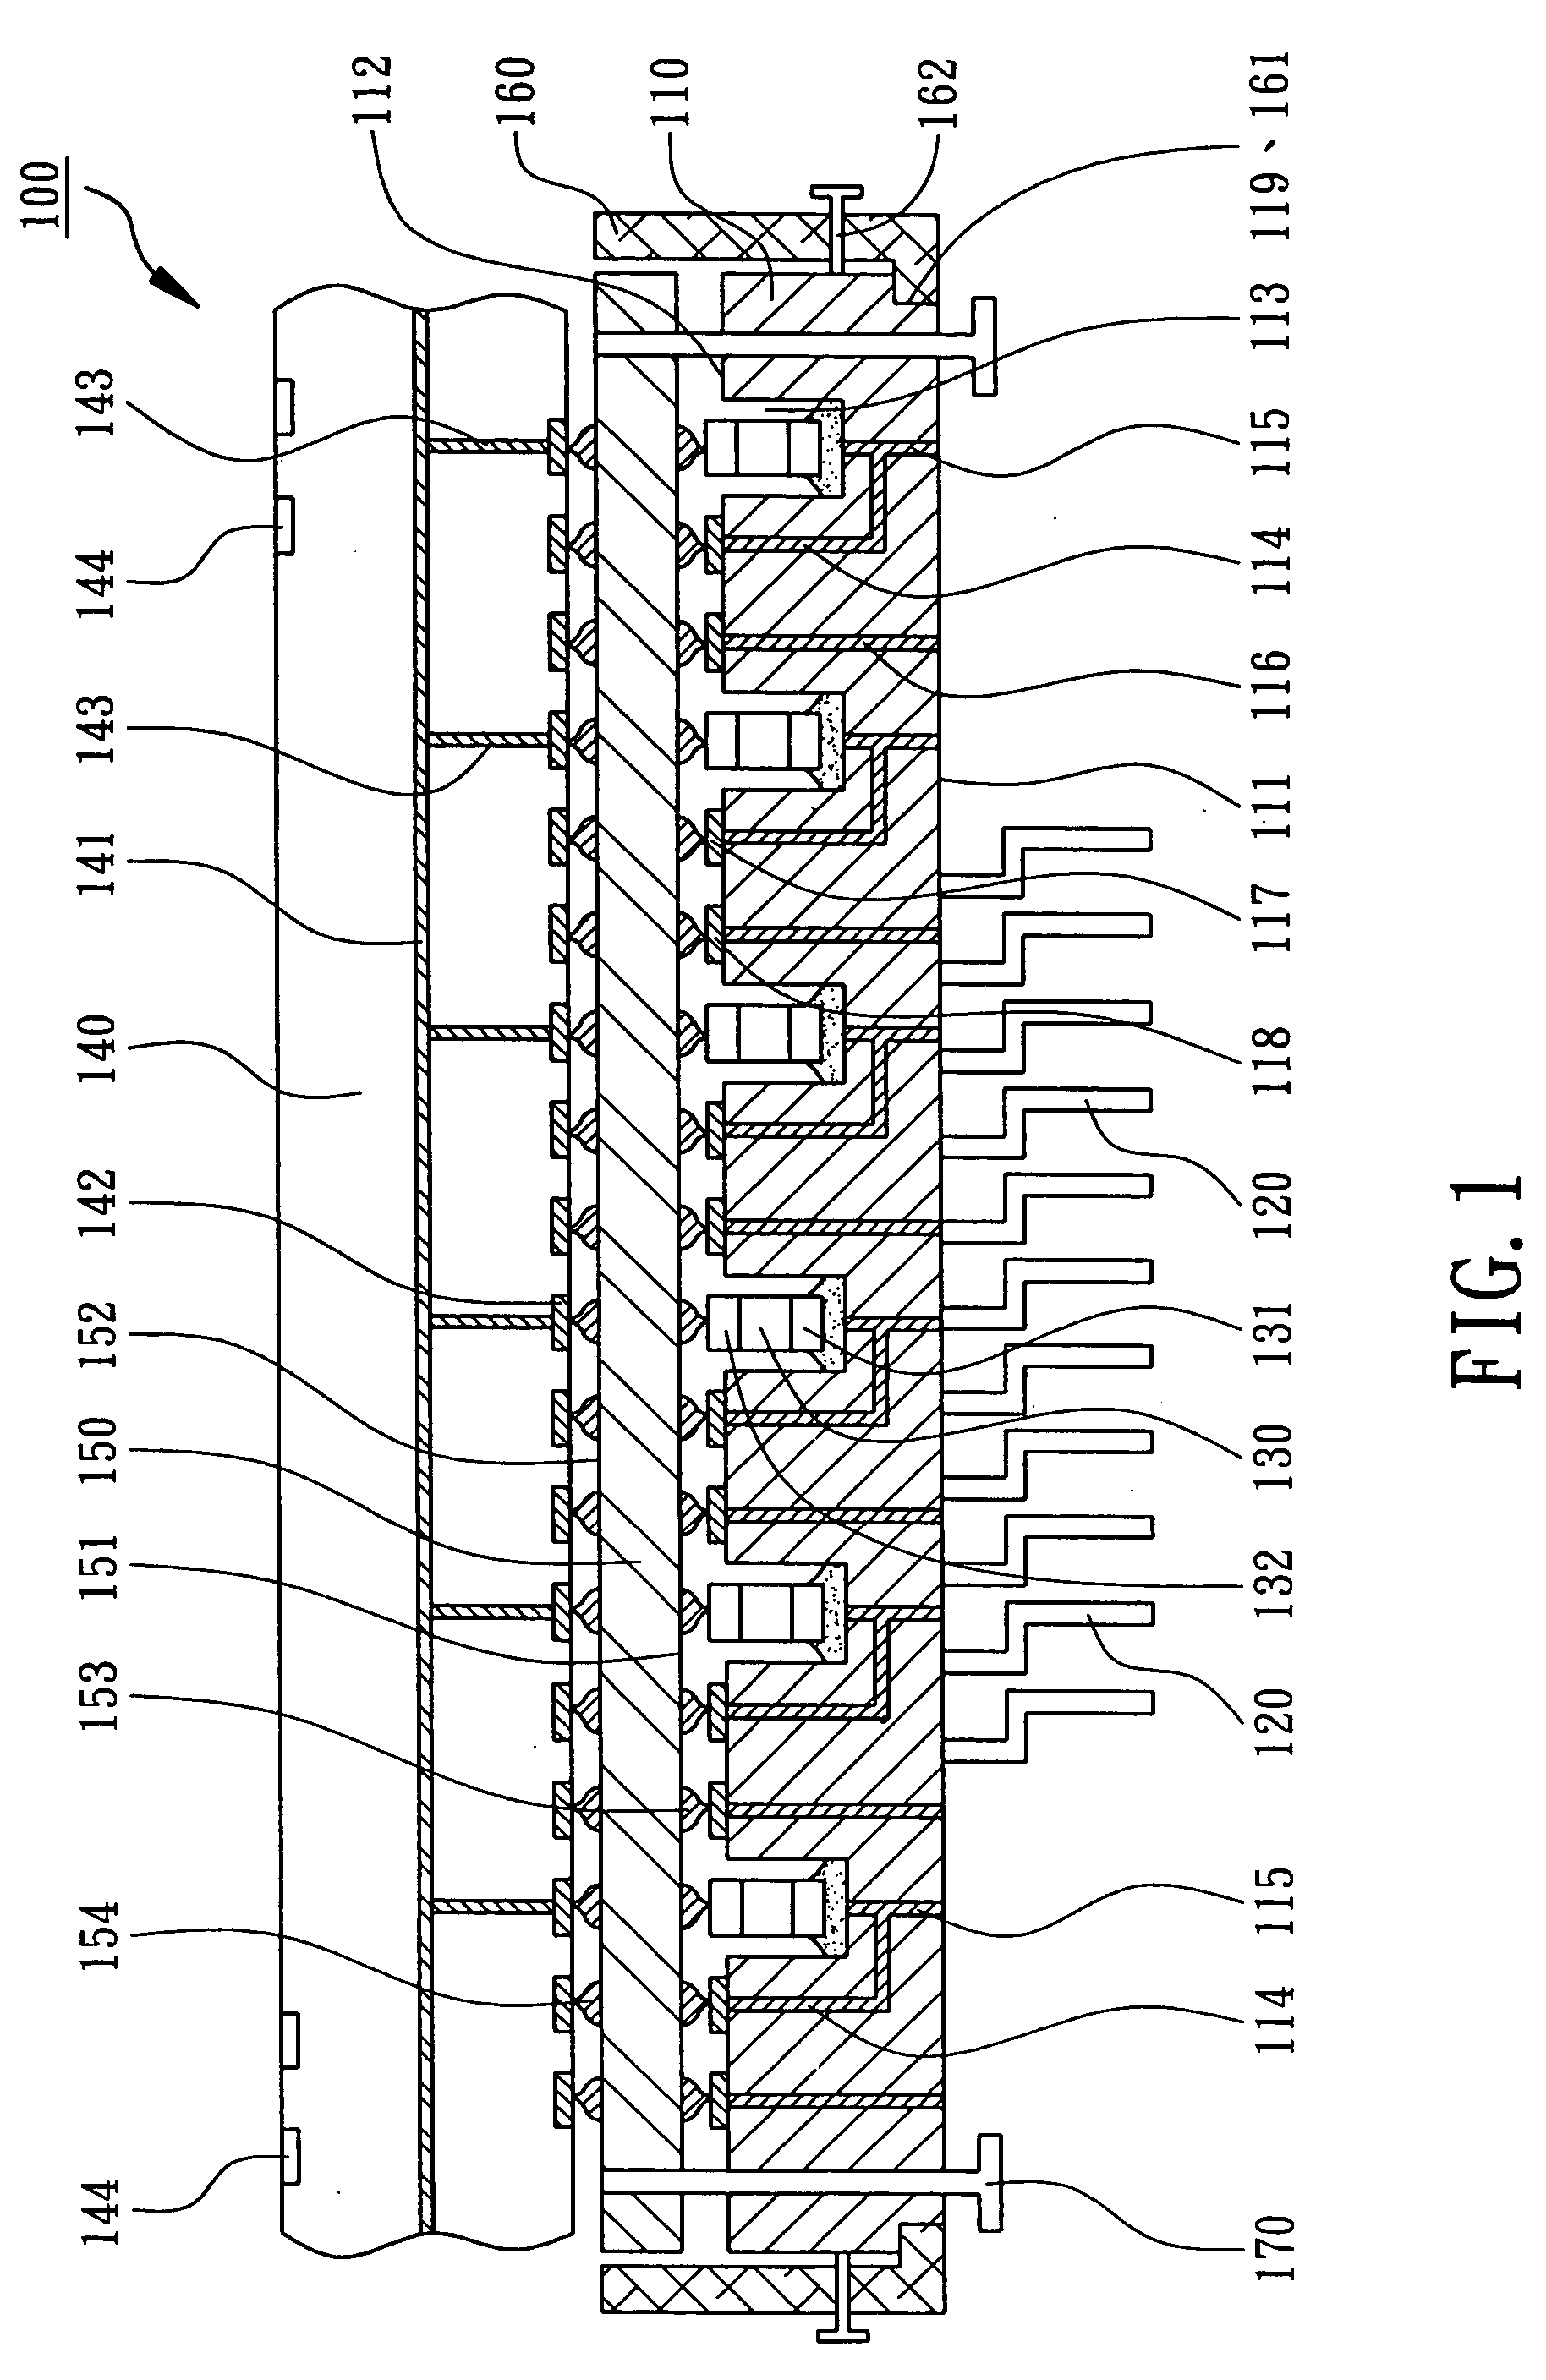 Modularized probe card for high frequency probing